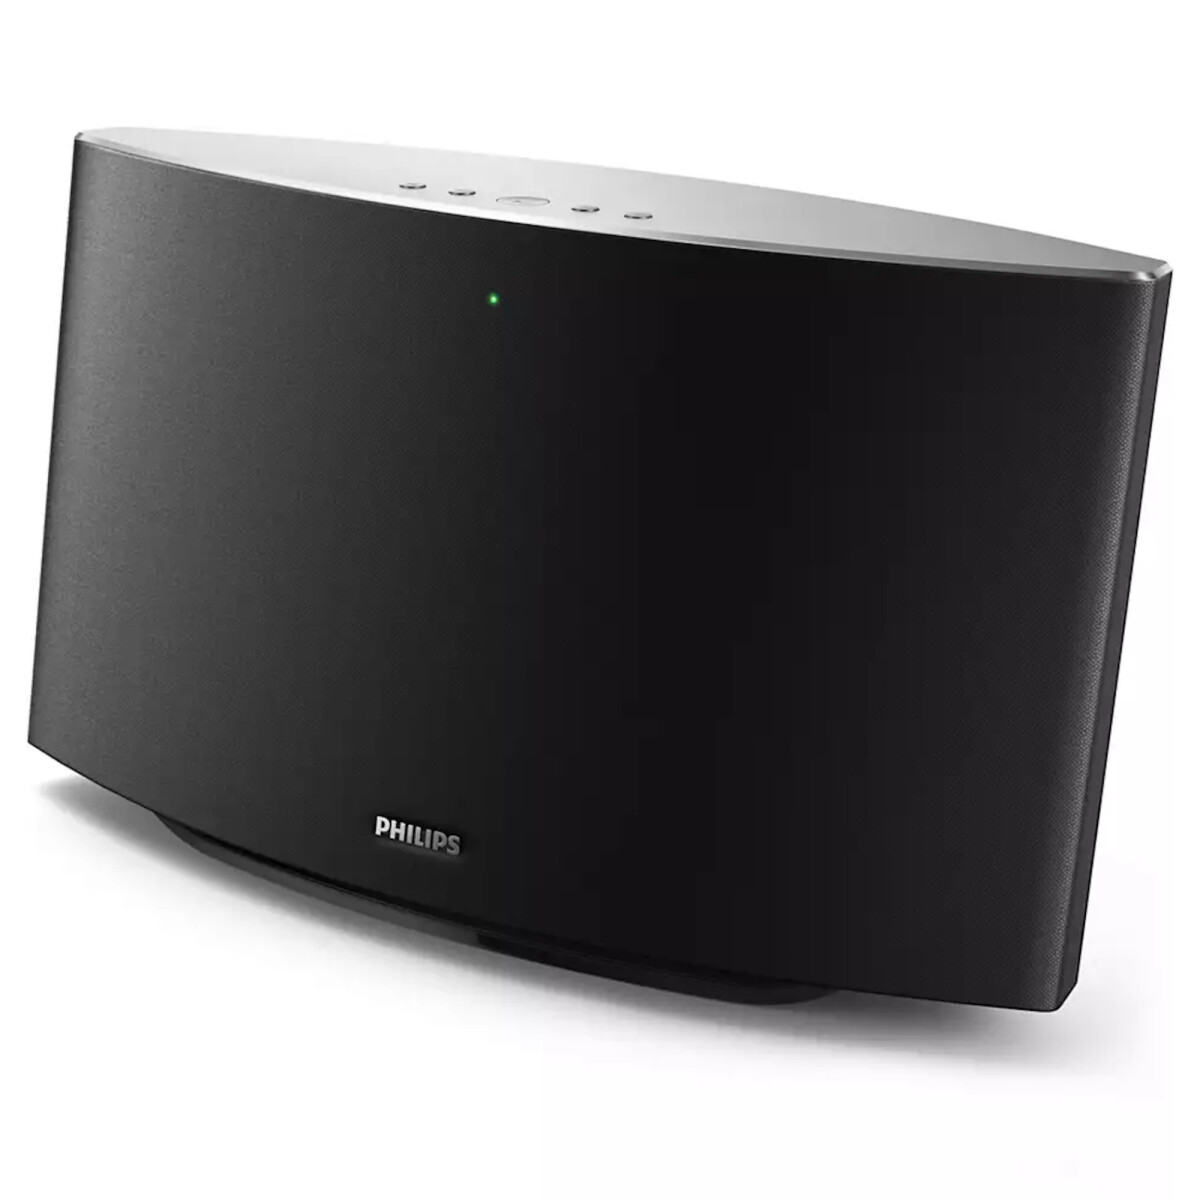 Philips - Parlante Inalámbrico. Spotify Connect. 110 - 240V. Color Negro. - 001 